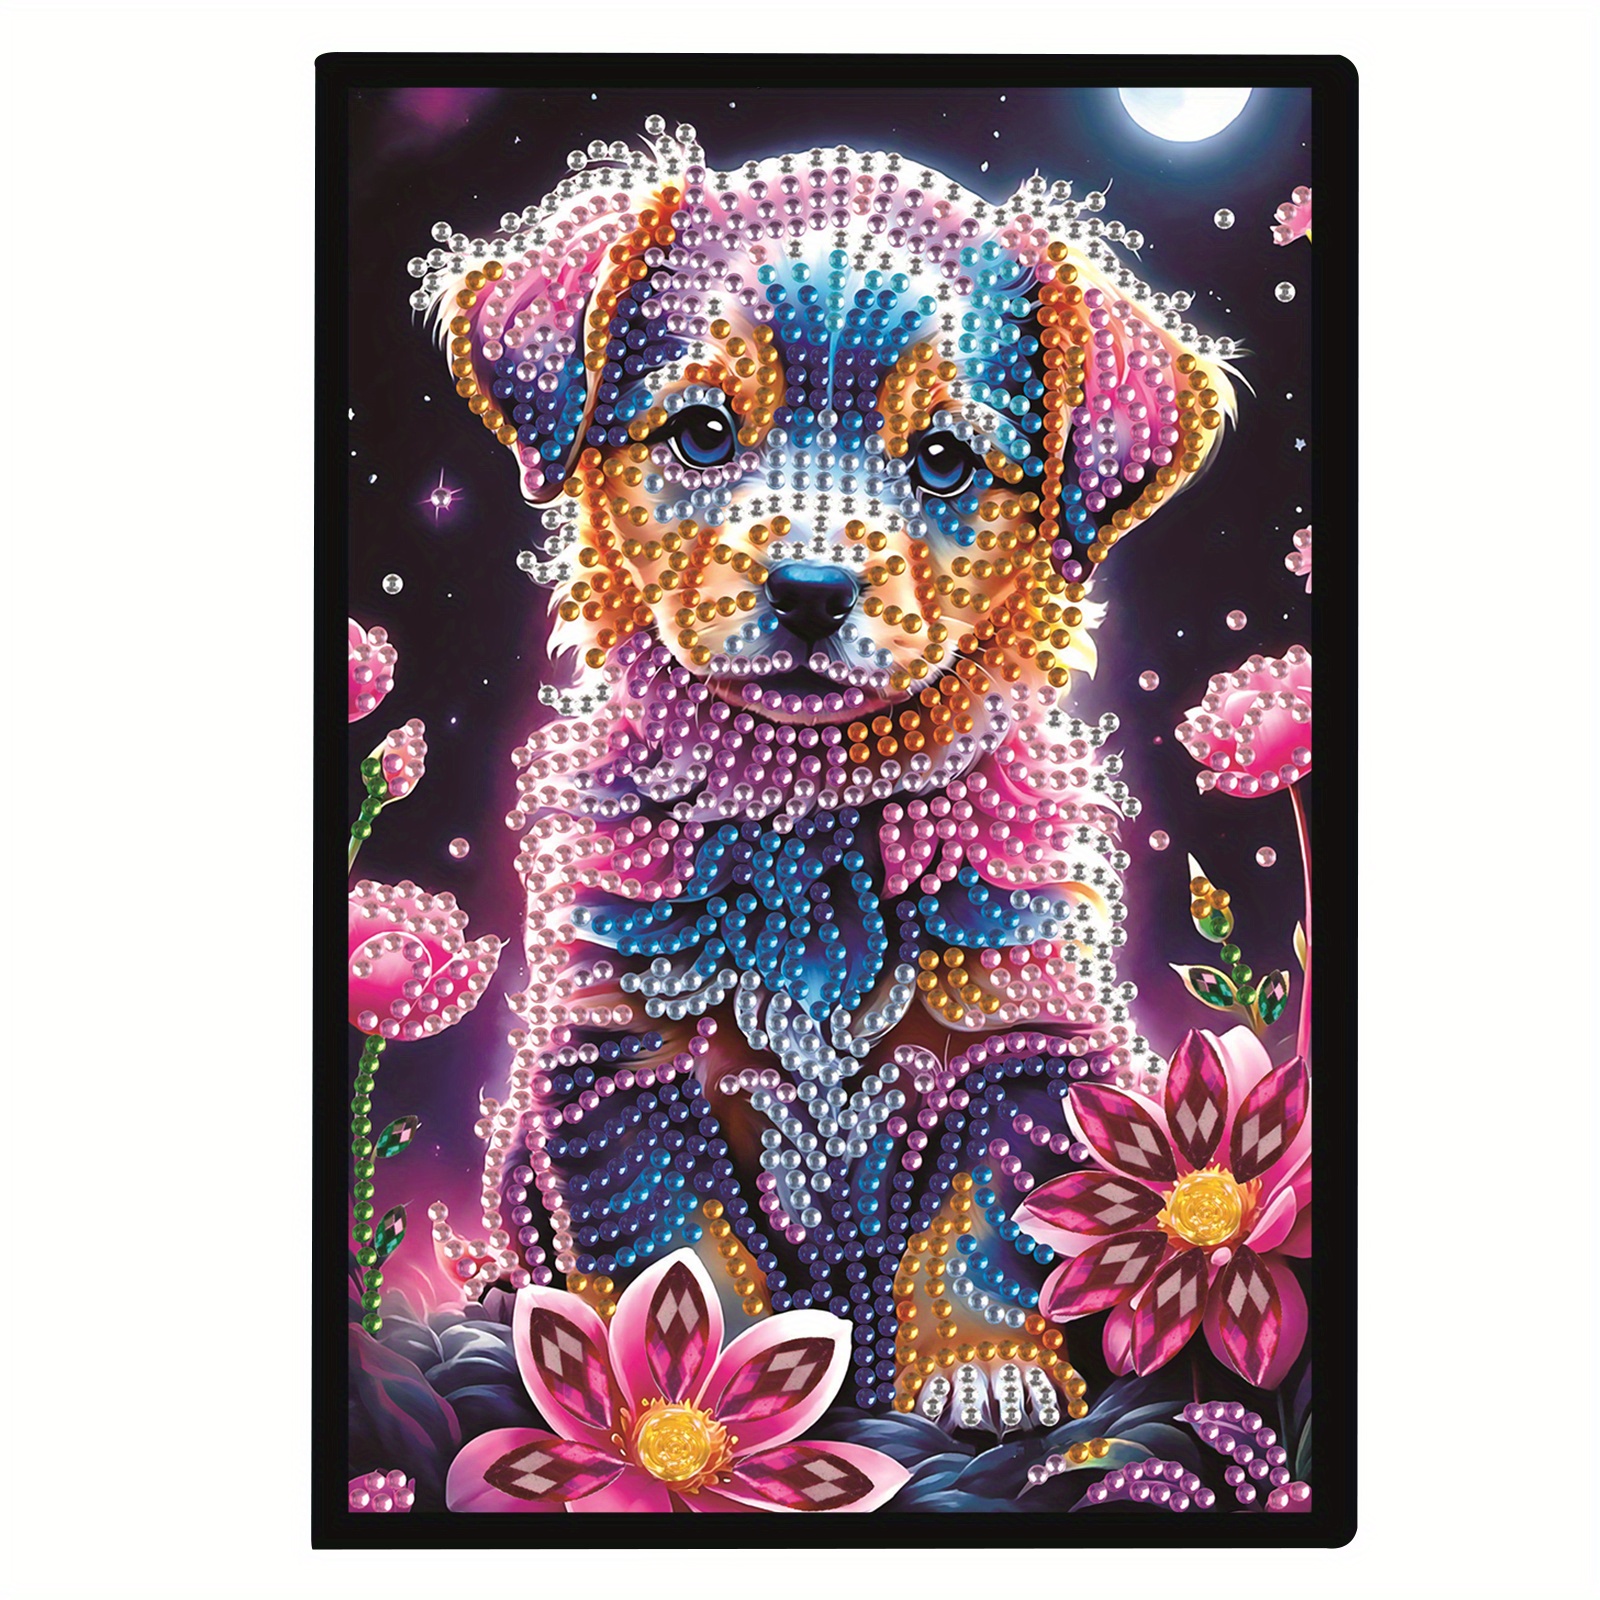 

A5 Diamond Painting Notebook Kit - 5d Diy Special Shaped Diamond Art Sketchbook With Little Puppy Design, Animal Themed Crafting Journal With Irregular Diamonds And Full Toolkit